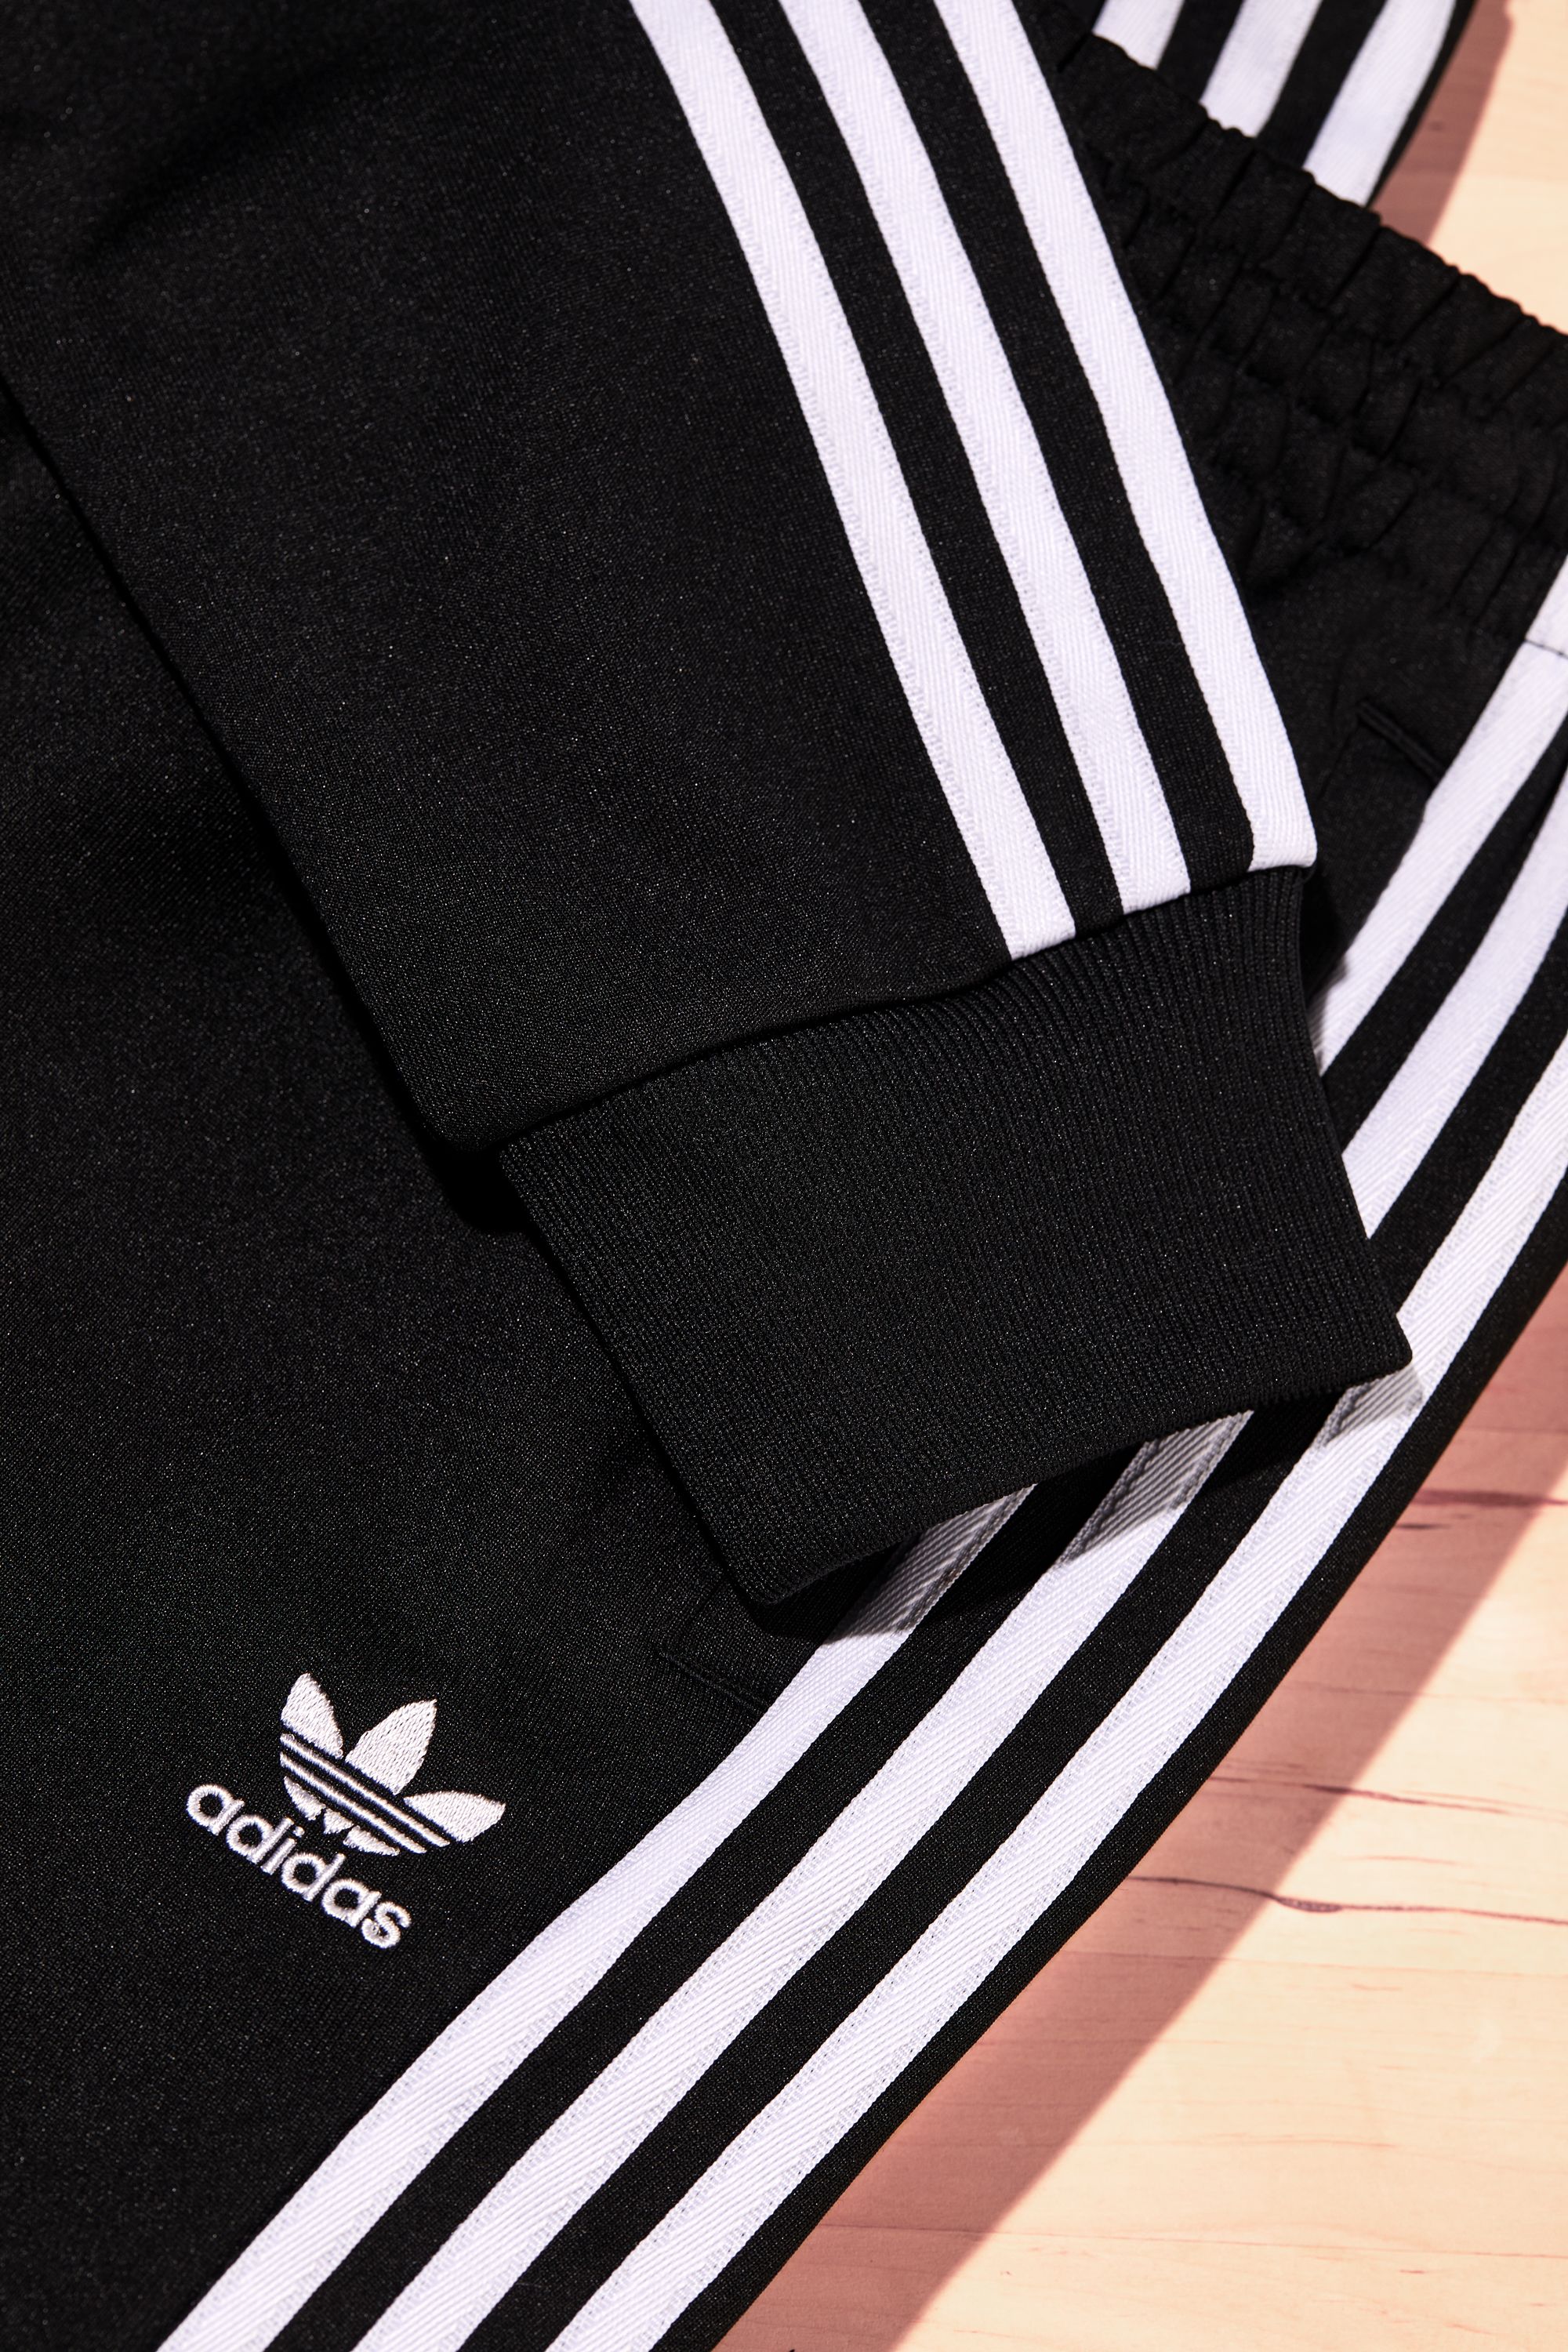 whole adidas outfit